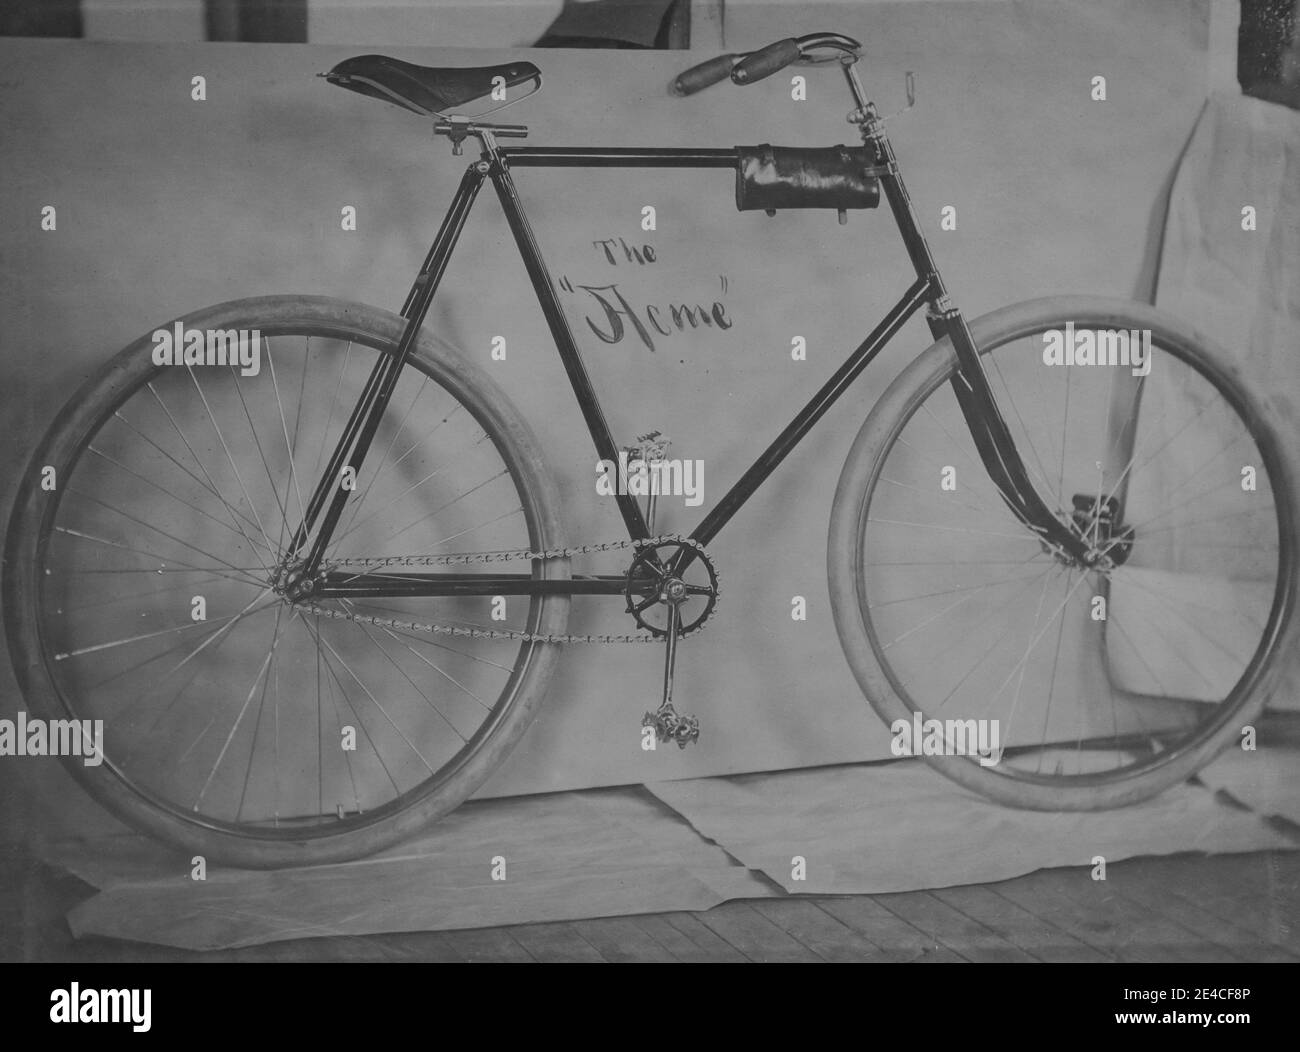 American archive monochrome photo of The Acme bicycle displayed. Taken in the late 19th century in NY, USA Stock Photo